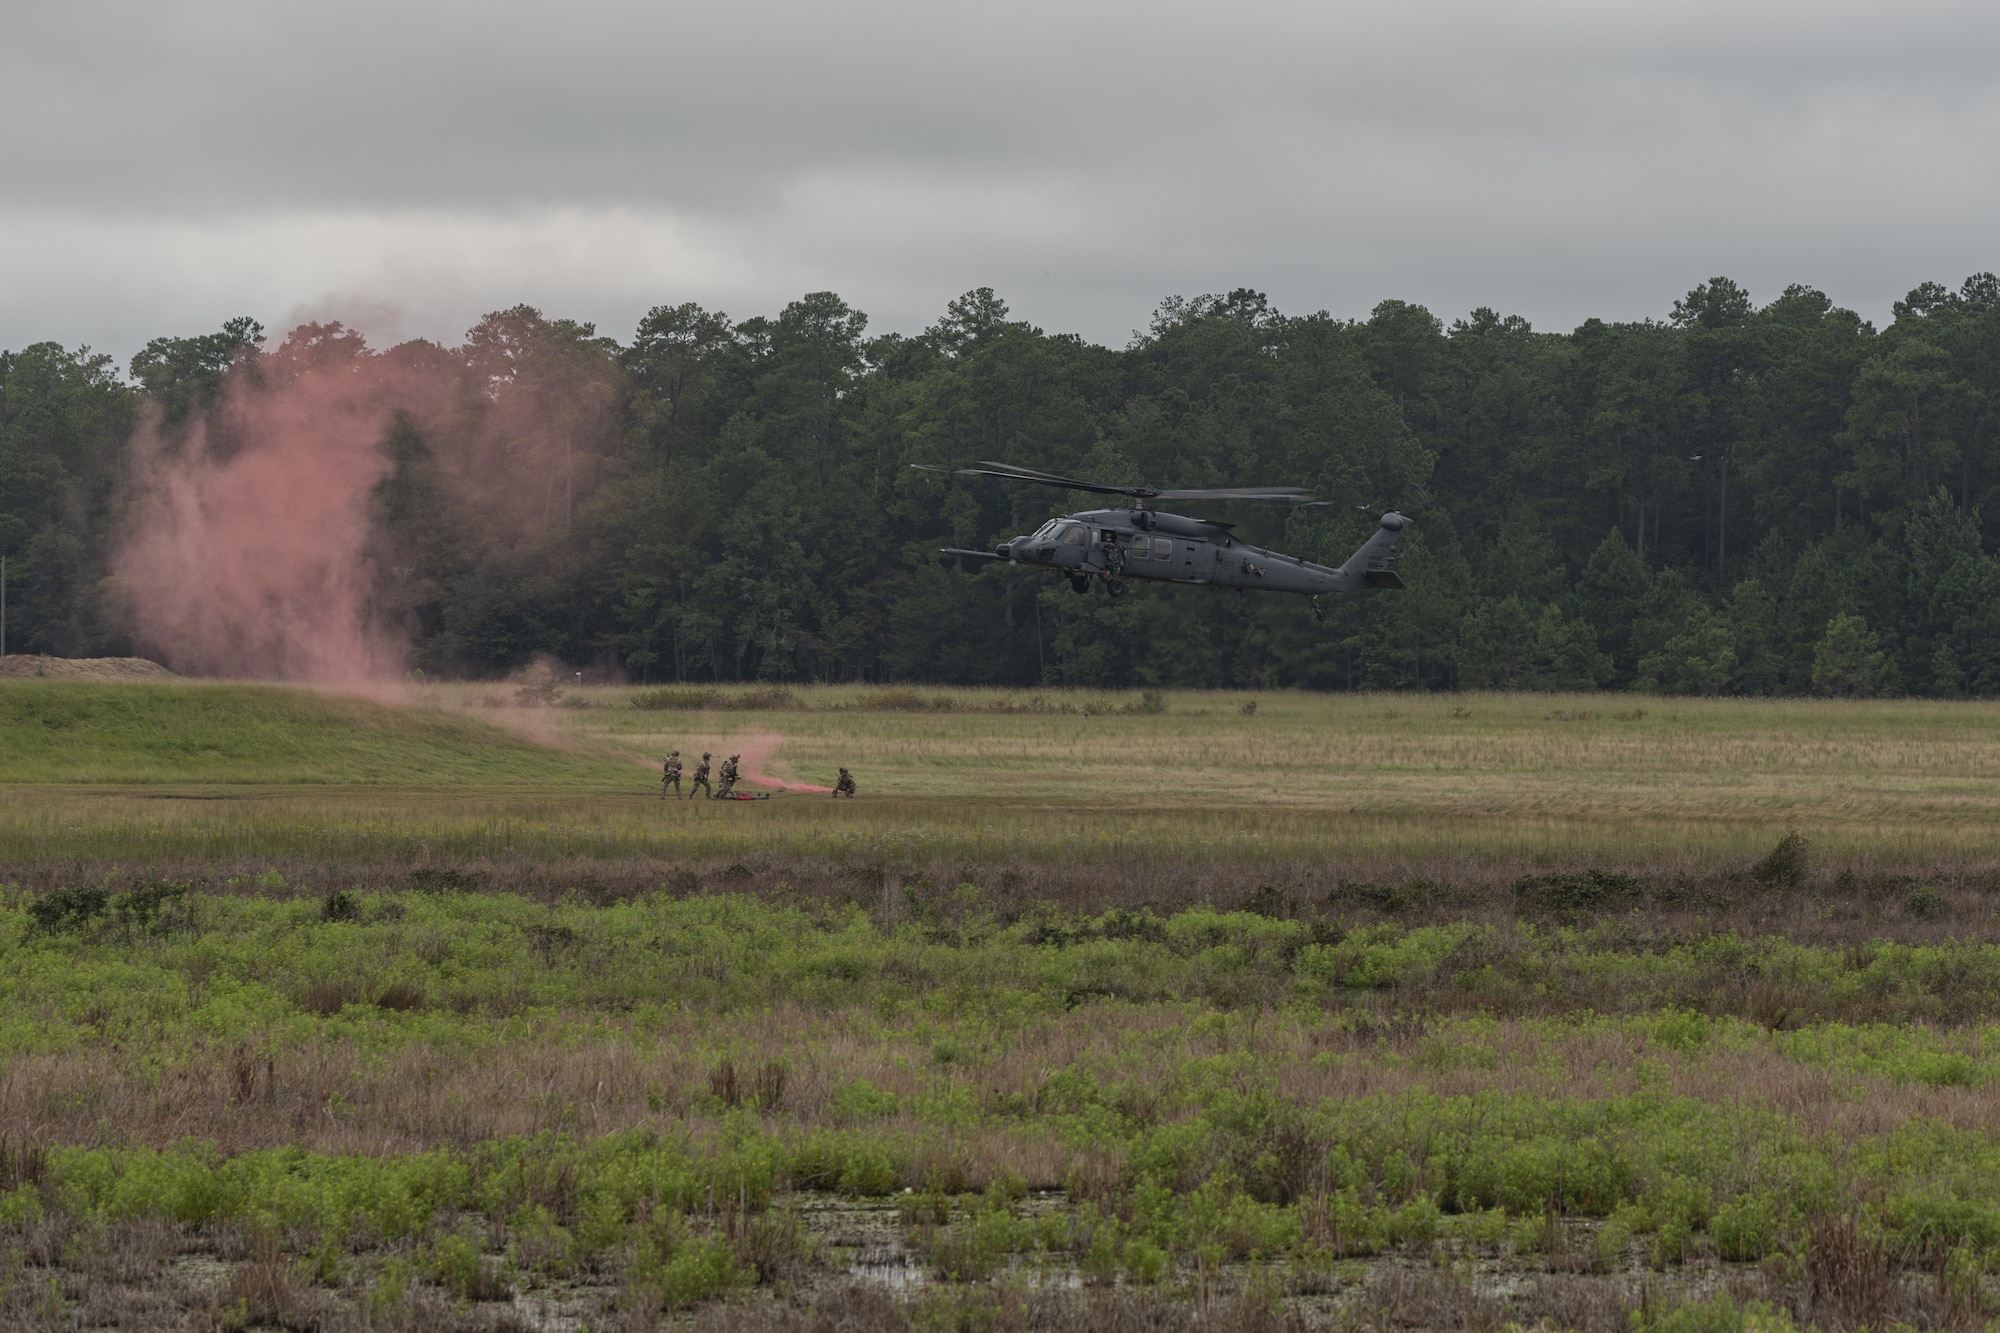 U.S. Air Force Airmen assigned to the 38th Rescue Squadron perform a combat search and rescue demonstration at Moody Air Force Base, Georgia, Sept. 9, 2022. The 23rd Maintenance Group and 347th Rescue Group have successfully postured the HH-60W Jolly Green II capabilities for maximum combat readiness and full integration in rescue operations alongside the HC-130J Combat King II aircraft. (U.S. Air Force photo by Senior Airman Jasmine M. Barnes)